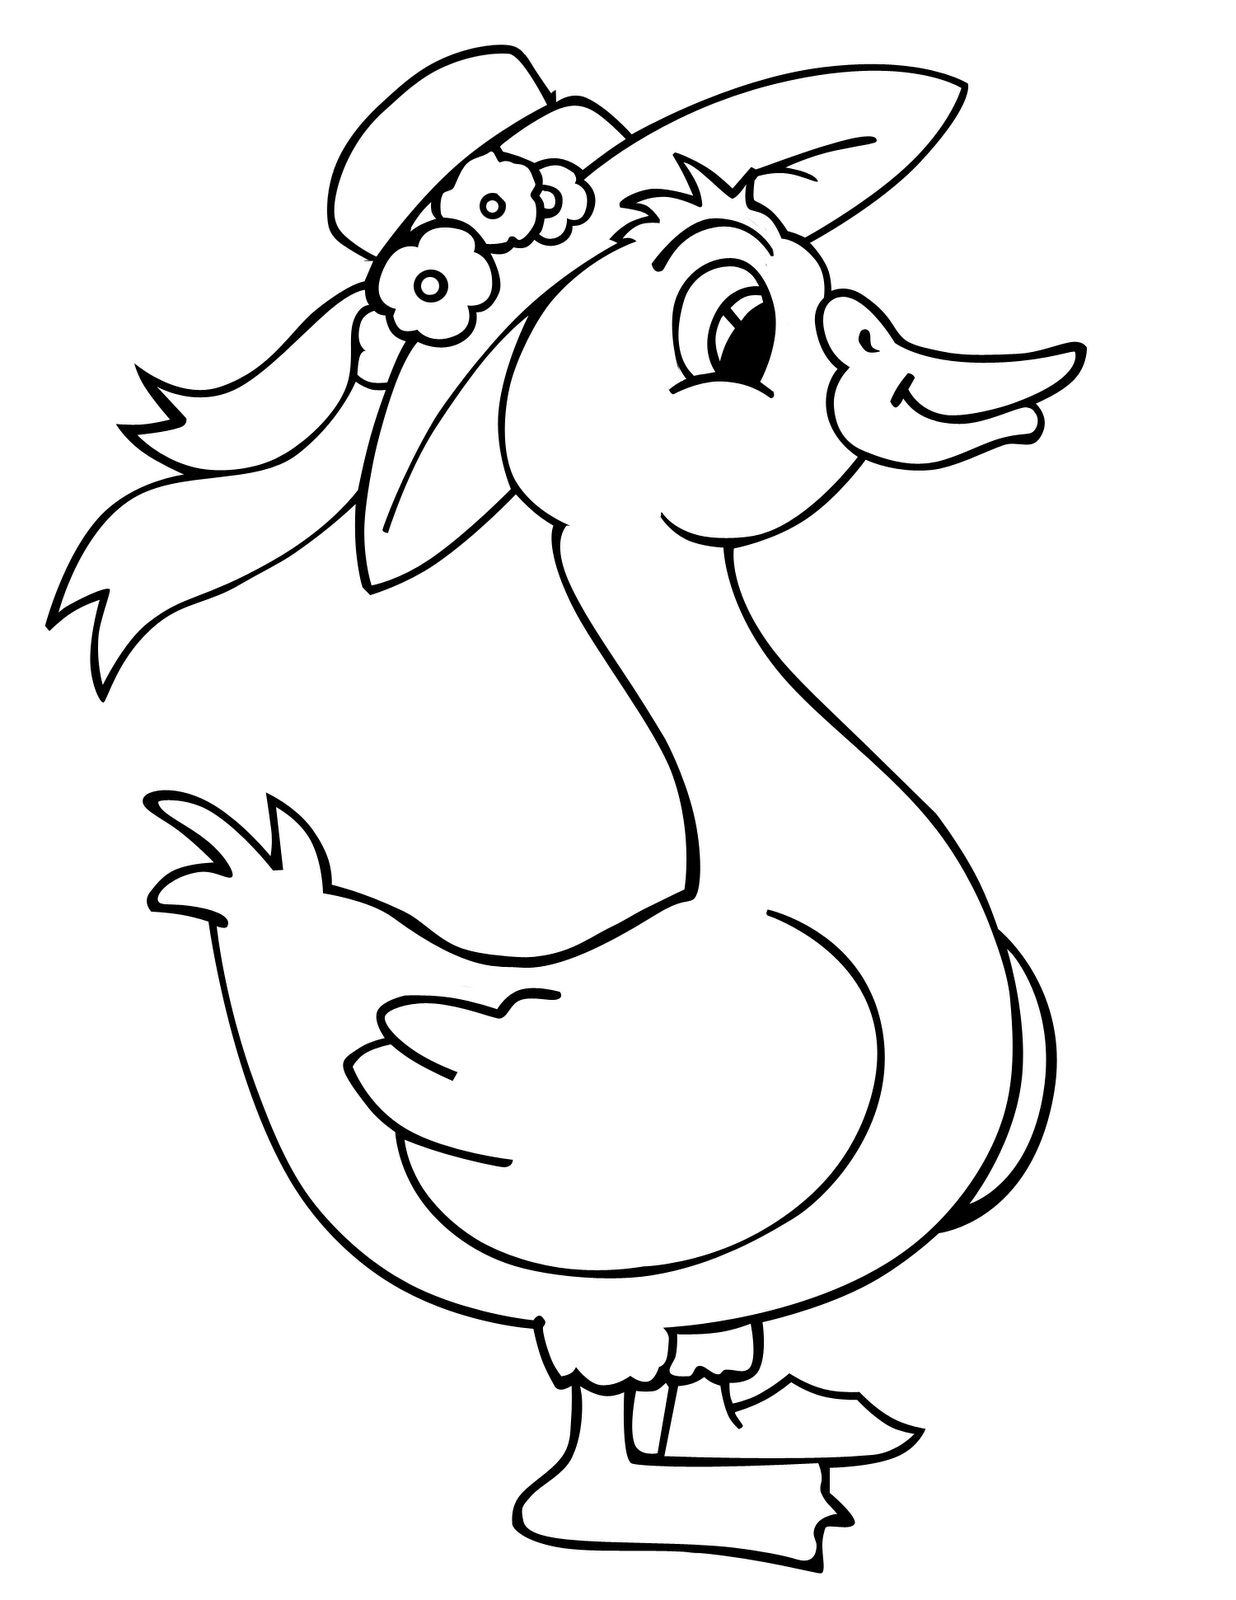 Free Printable Duck Coloring Pages For Kids - Animal Place